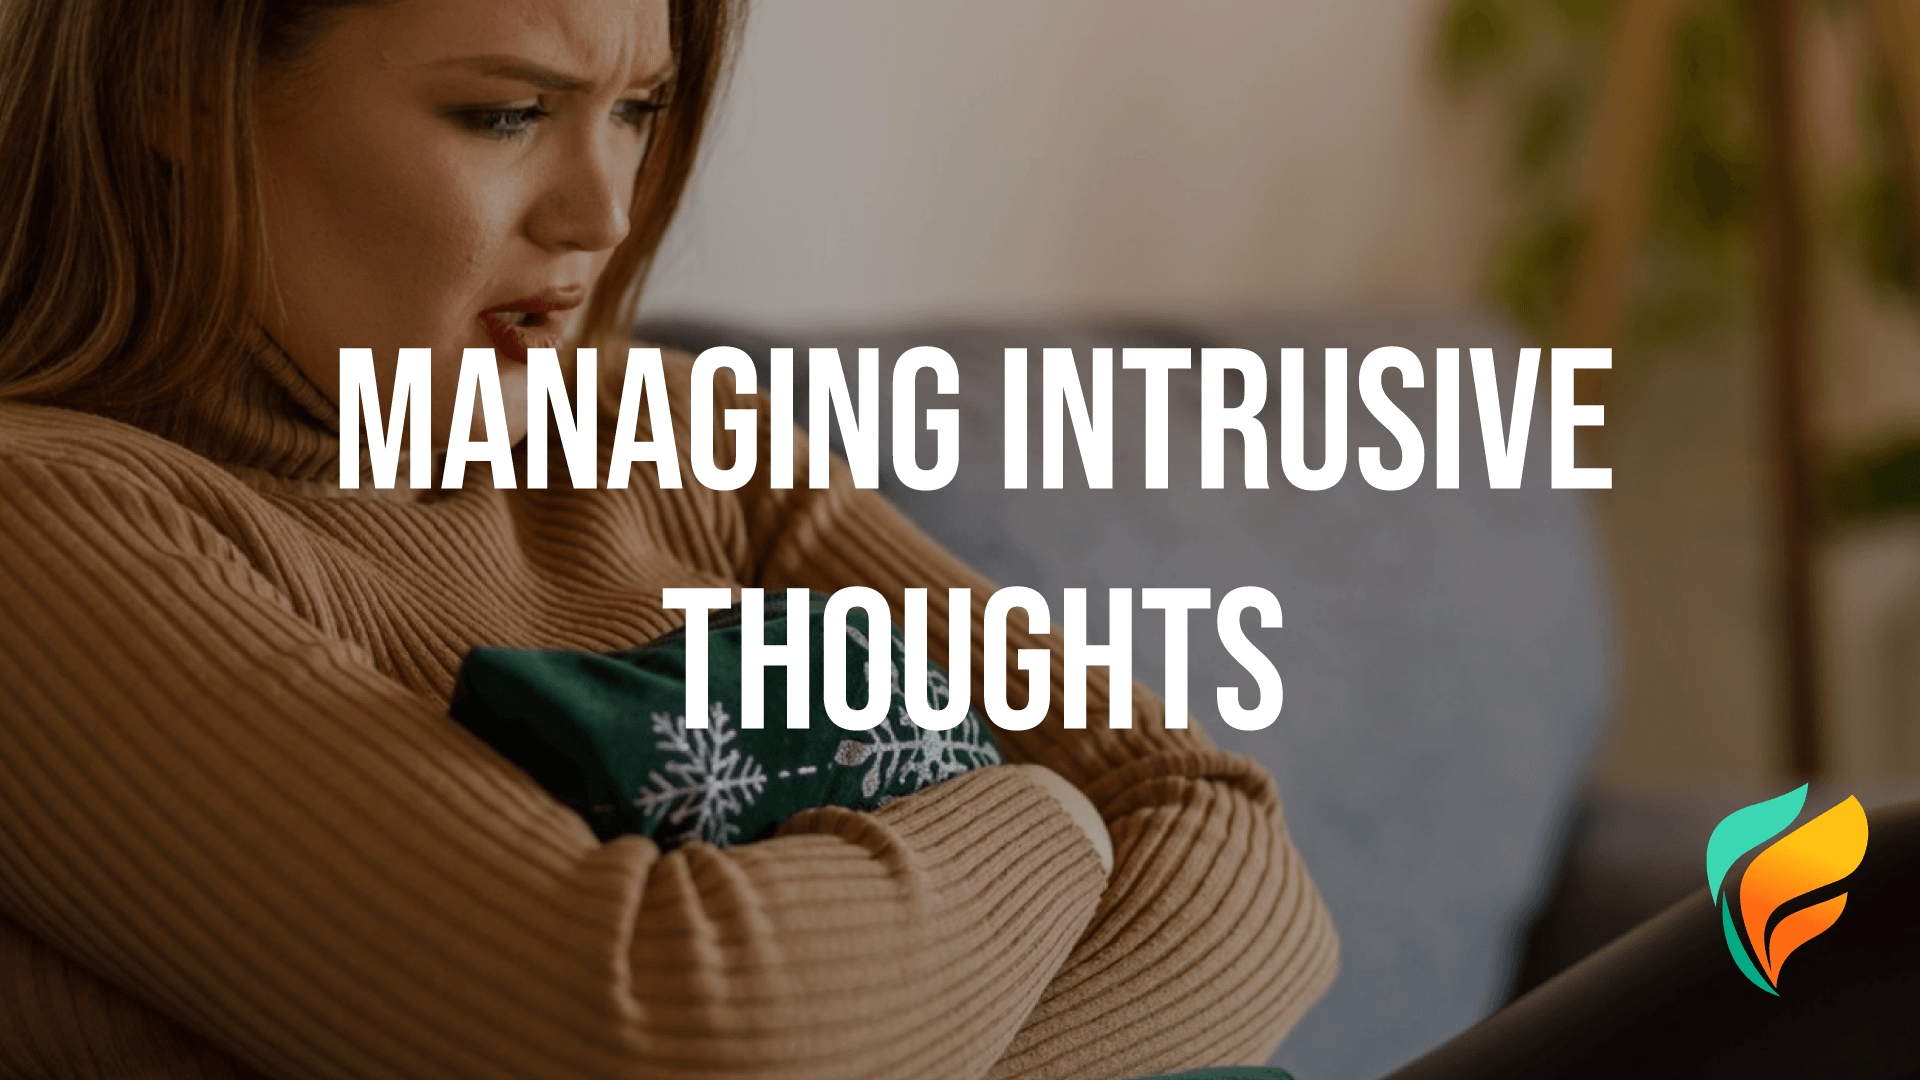 Managing Intrusive Thoughts: How to Keep Them at Bay